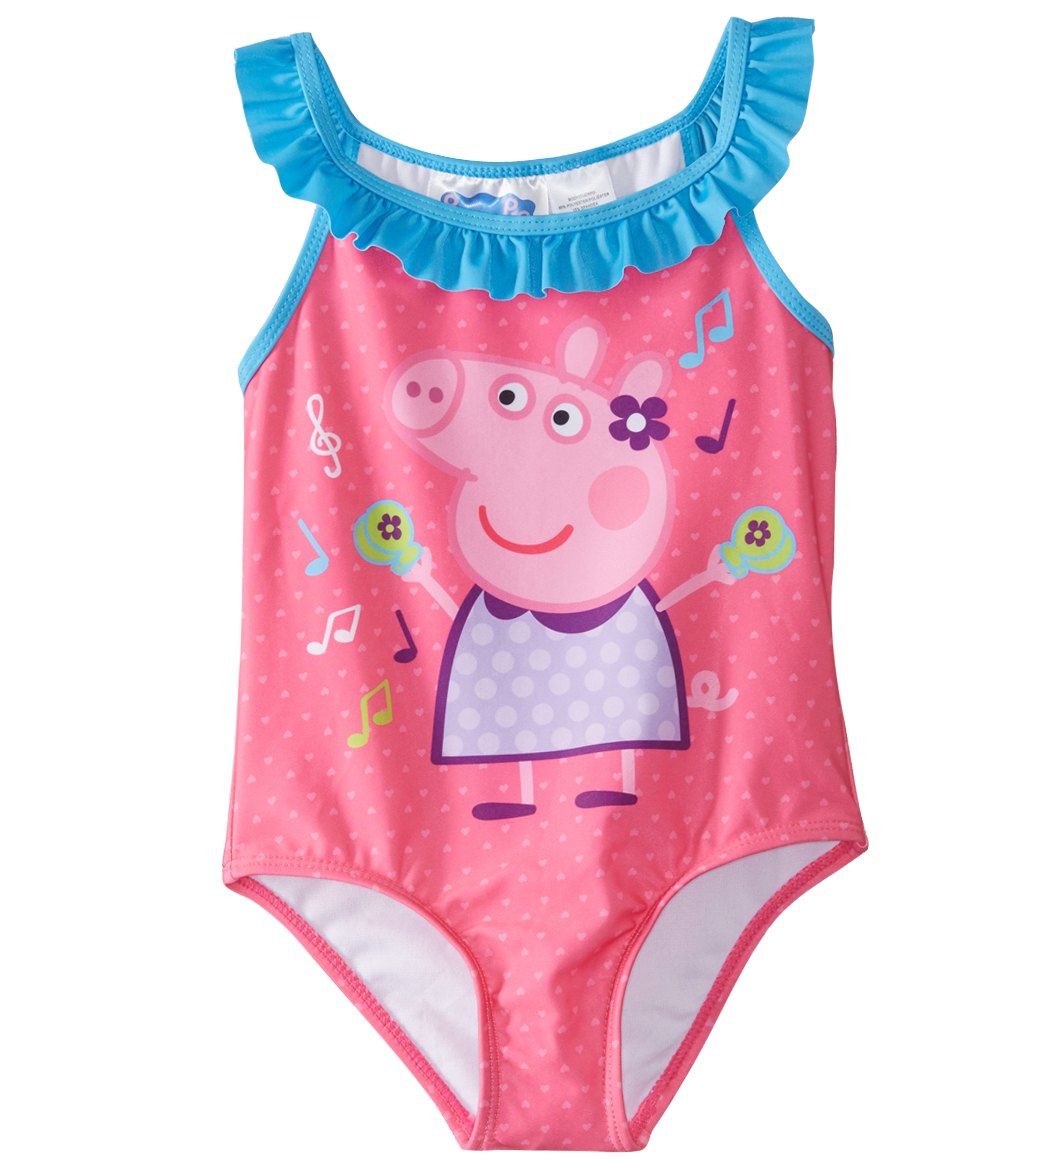 Disney Girls' Peppa Pig One Piece Swimsuit (Toddler) at SwimOutlet.com